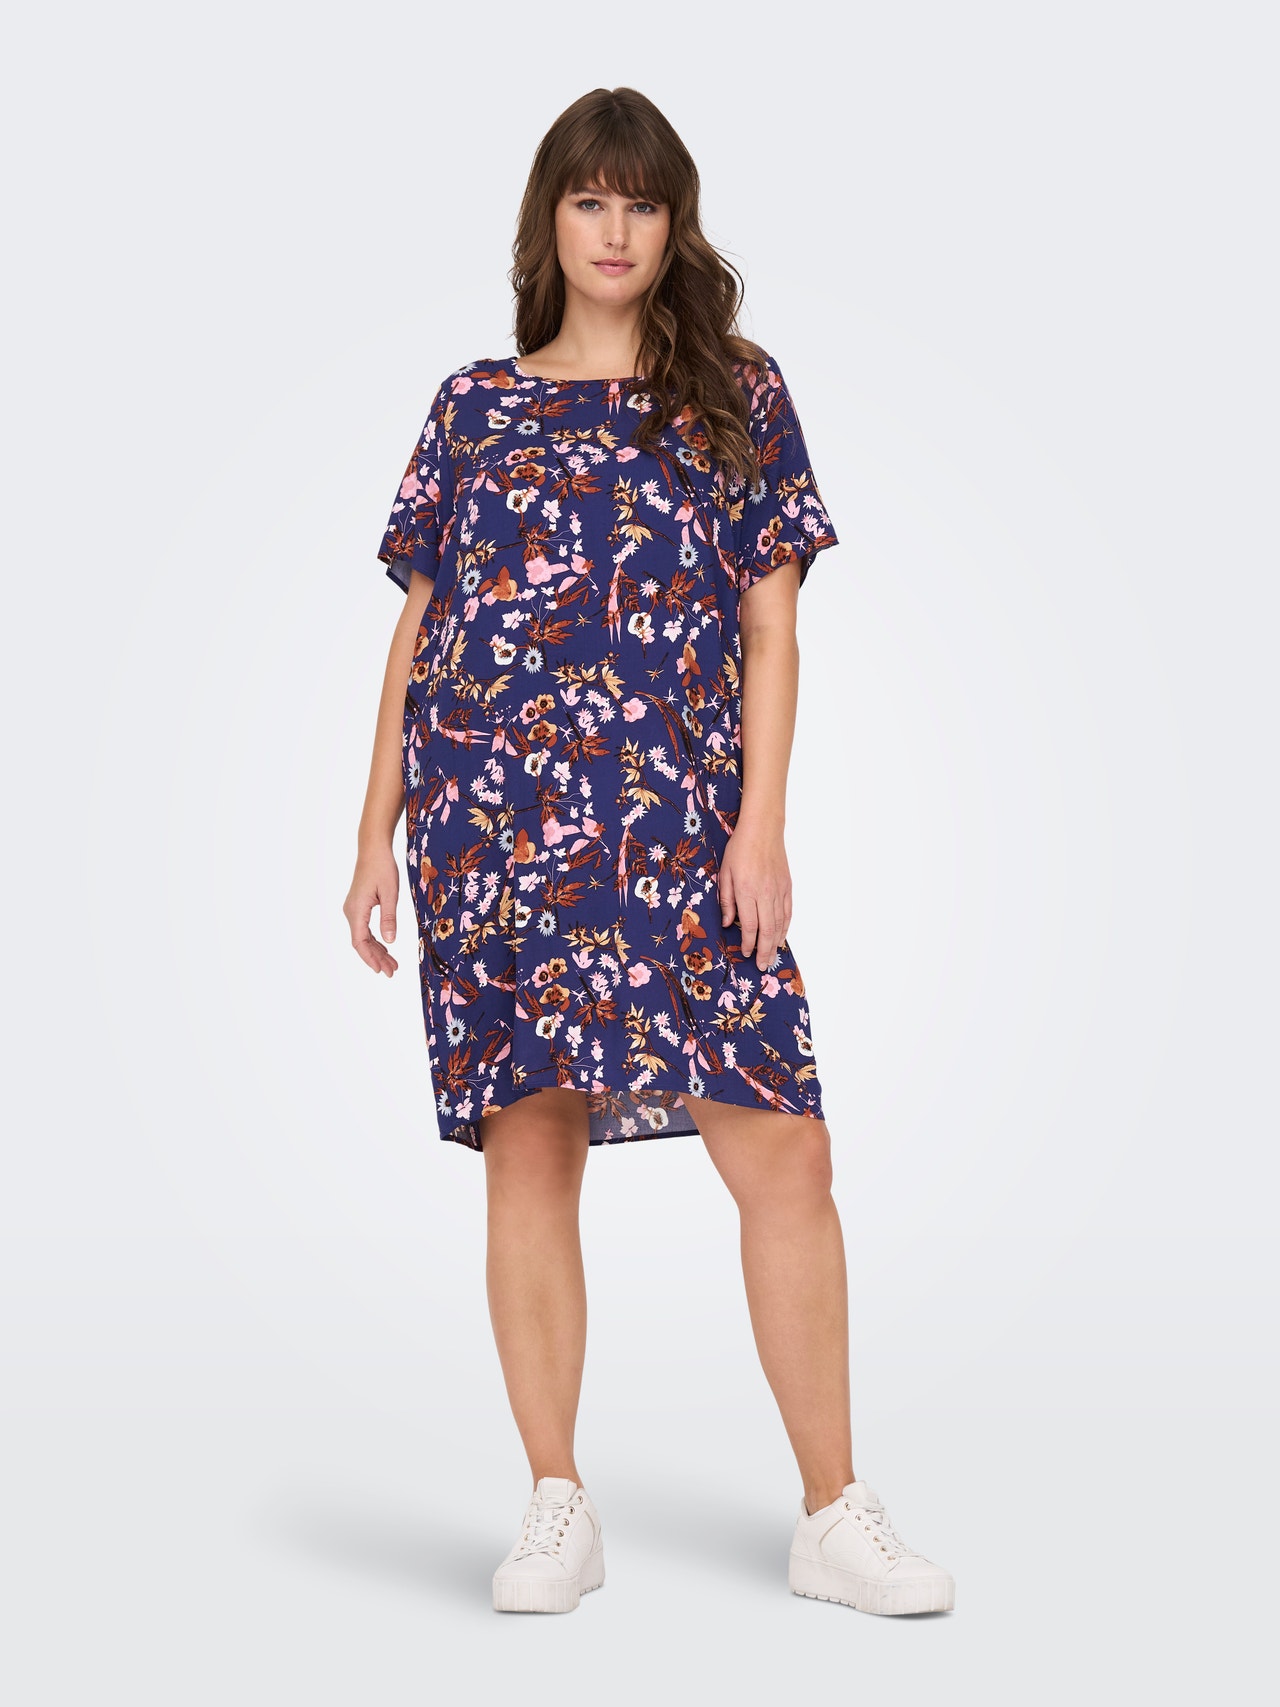 ONLY Curvy printed dress -Peacoat - 15284809